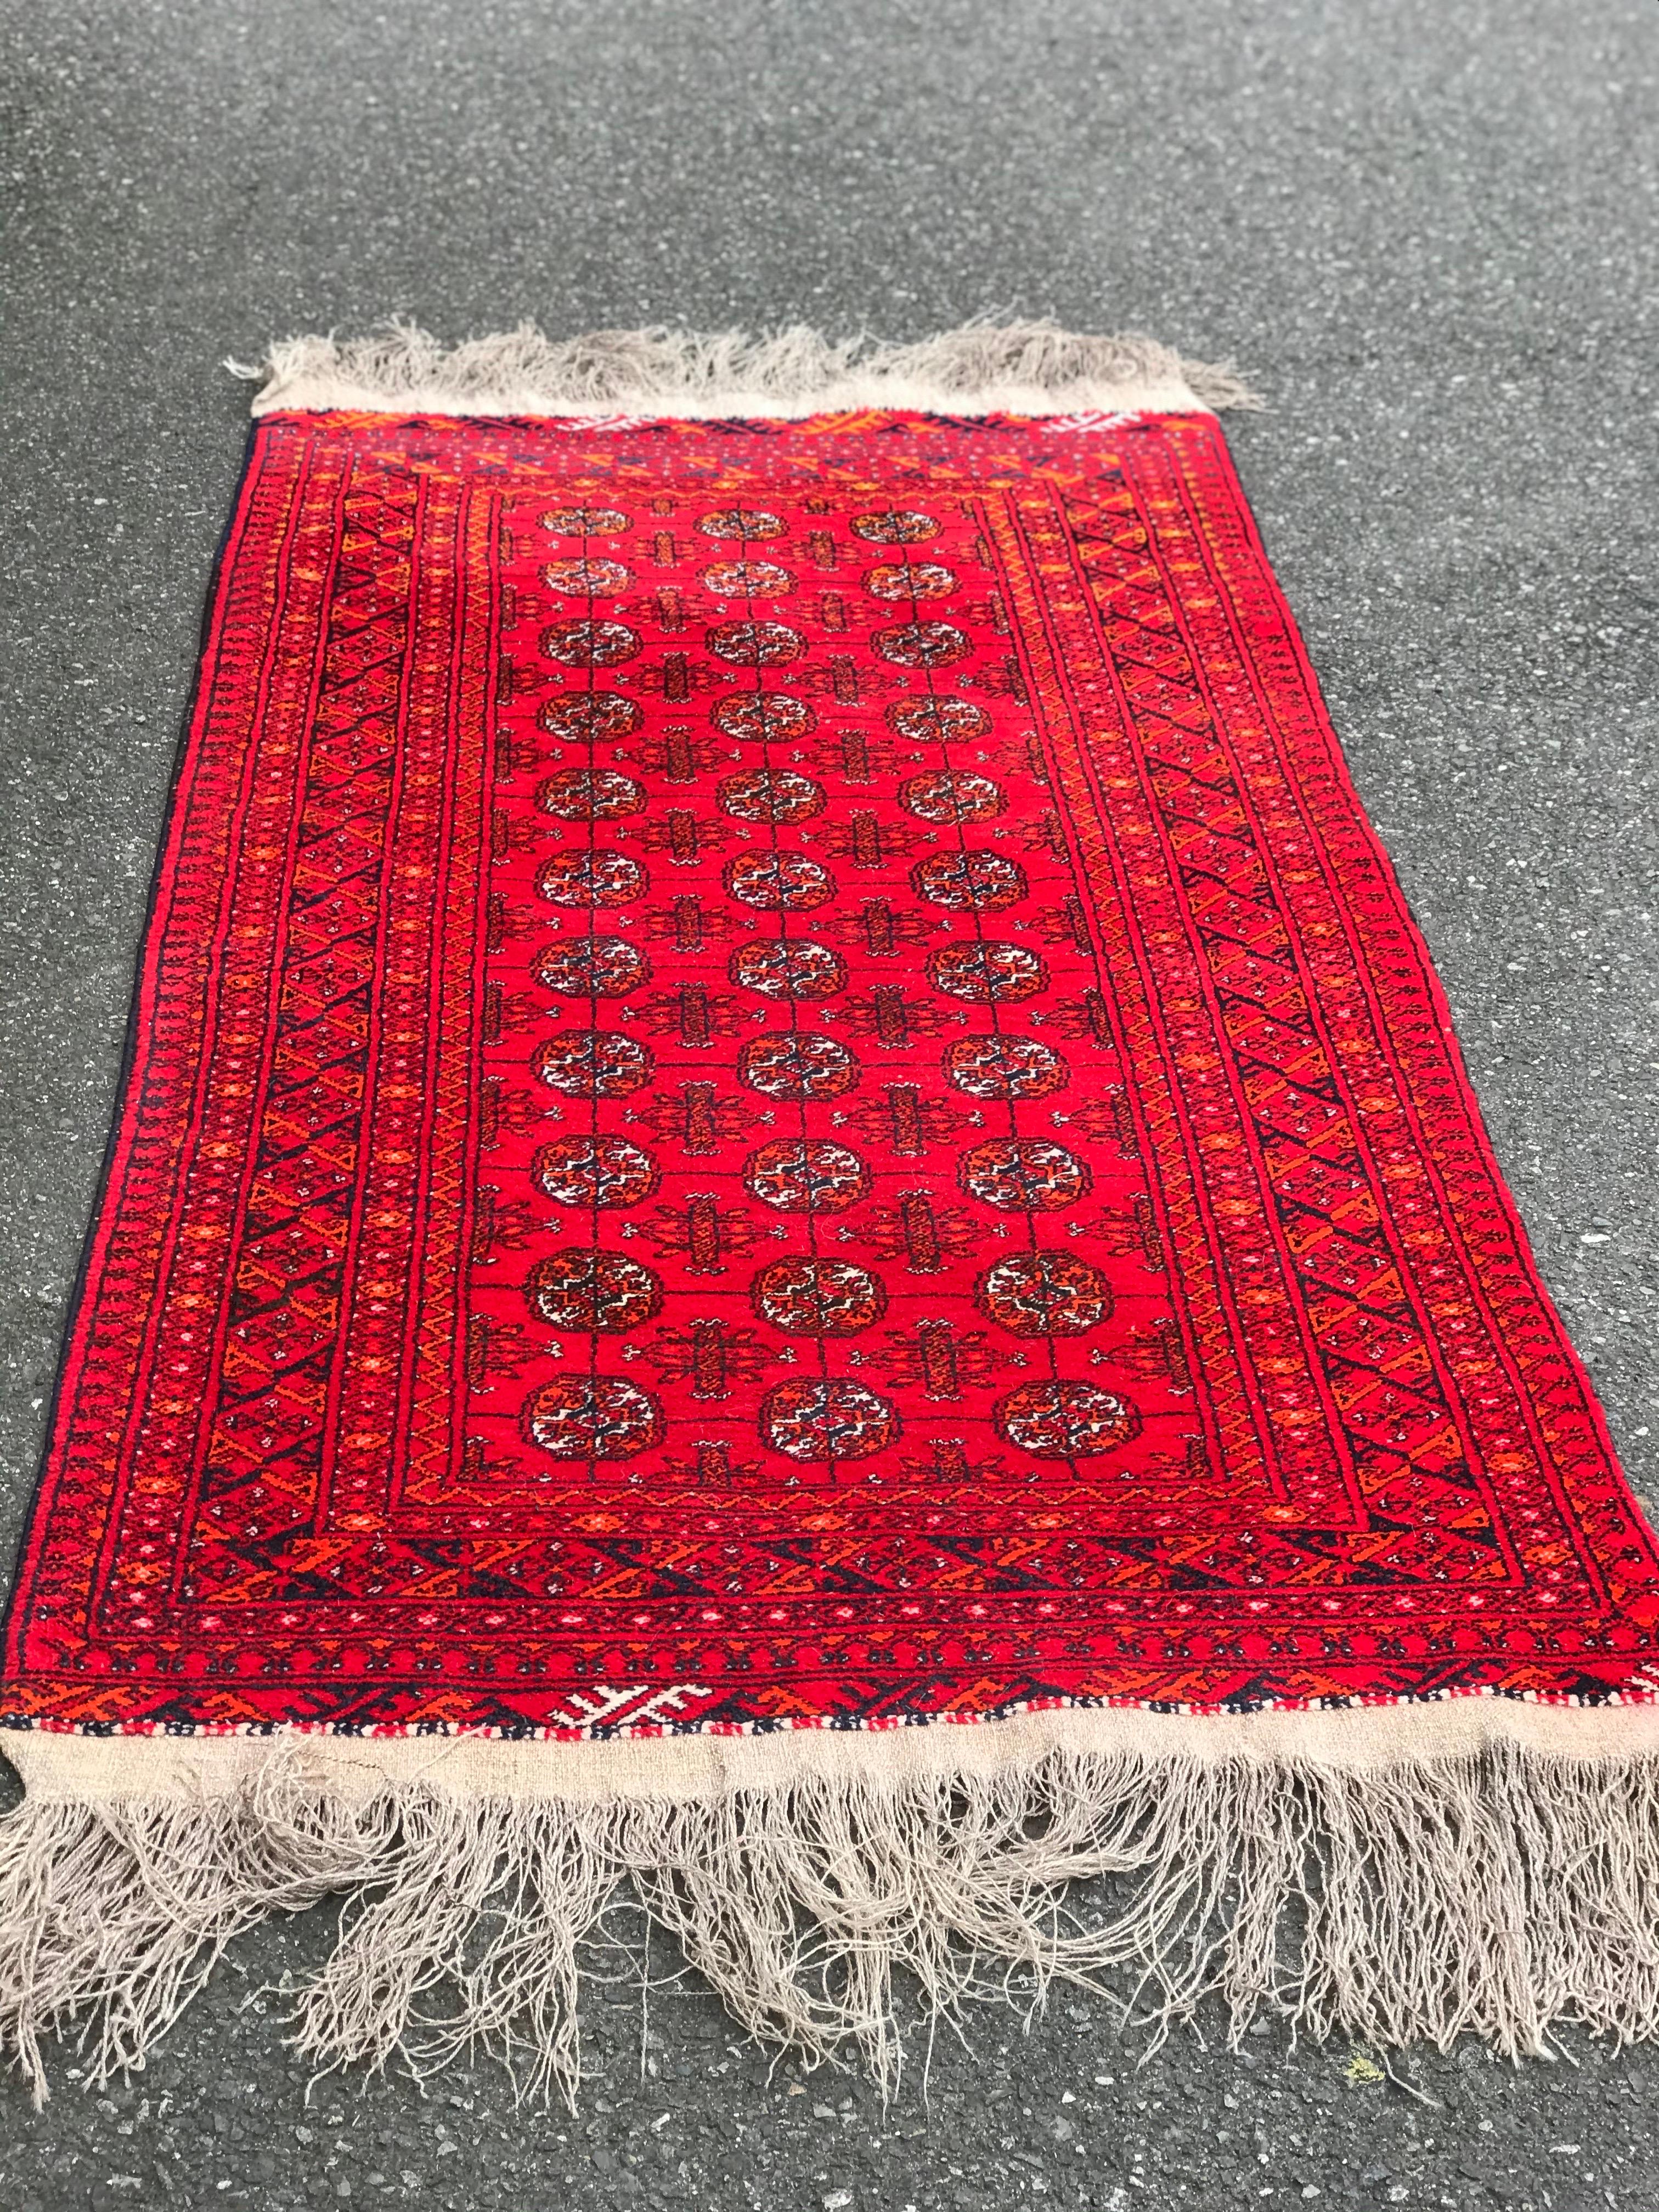 Vintage Barkkara Rug Runner Hand Knotted In Good Condition For Sale In Seattle, WA